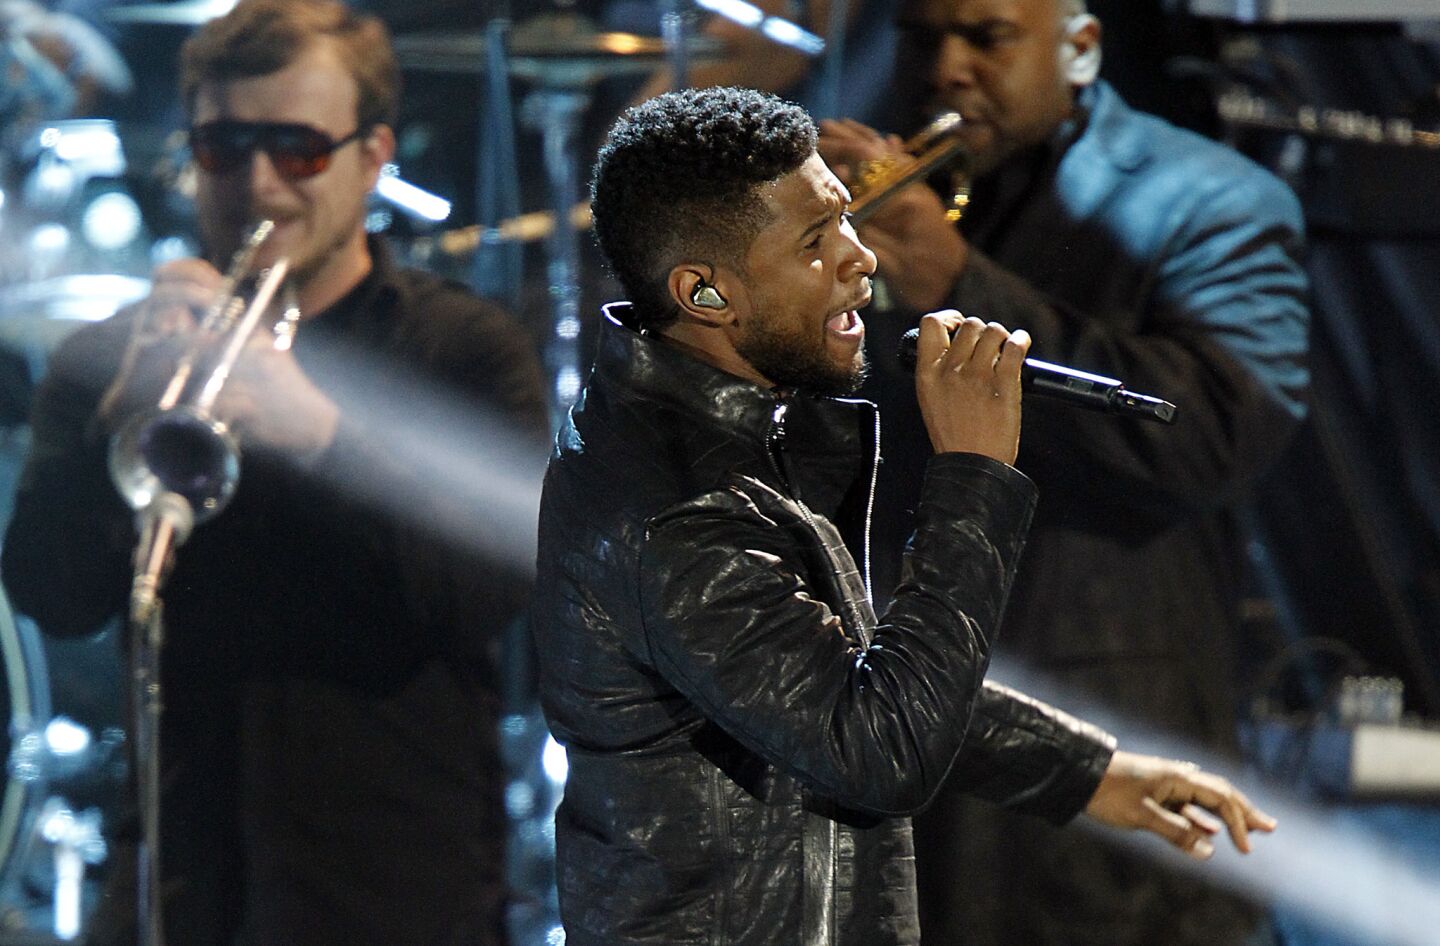 Usher, who has won eight Grammys from his previous 22 nominations, has earned four more nominations this year. He is up against himself with two nominations in both the R&B performance and R&B song categories.